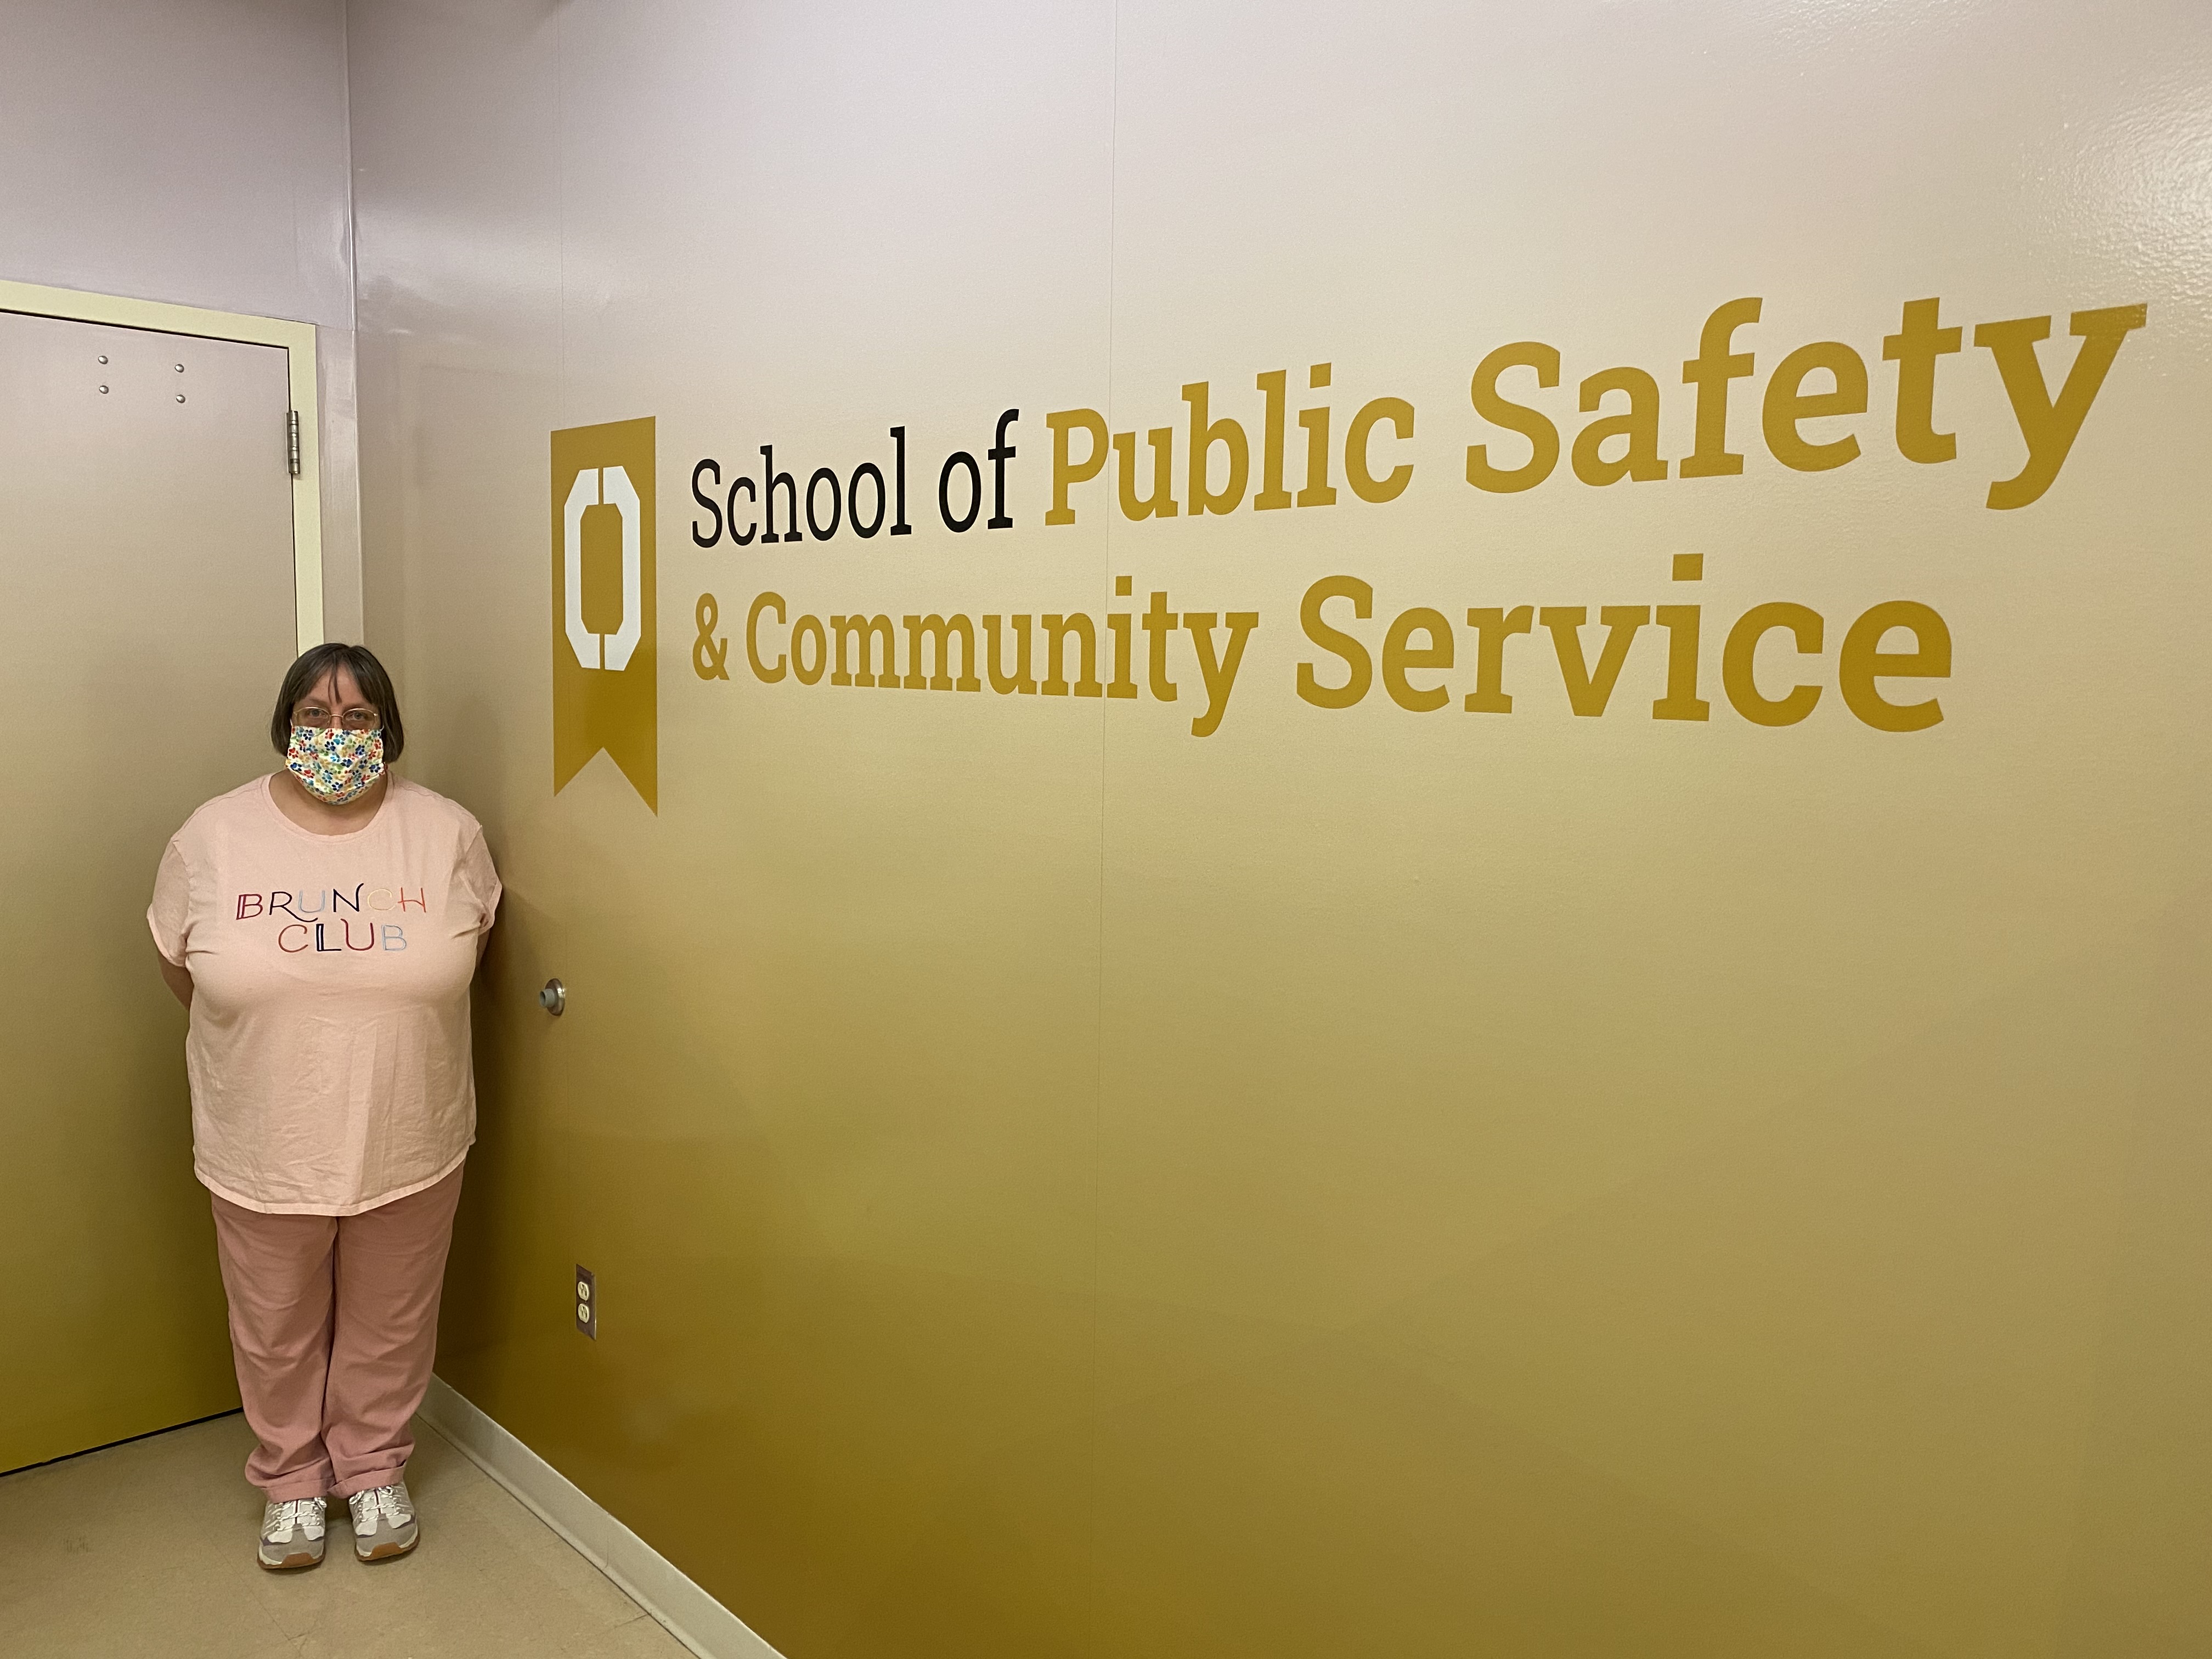 Woman standing in front of a sign that says "School of Public Safety & Community Service"